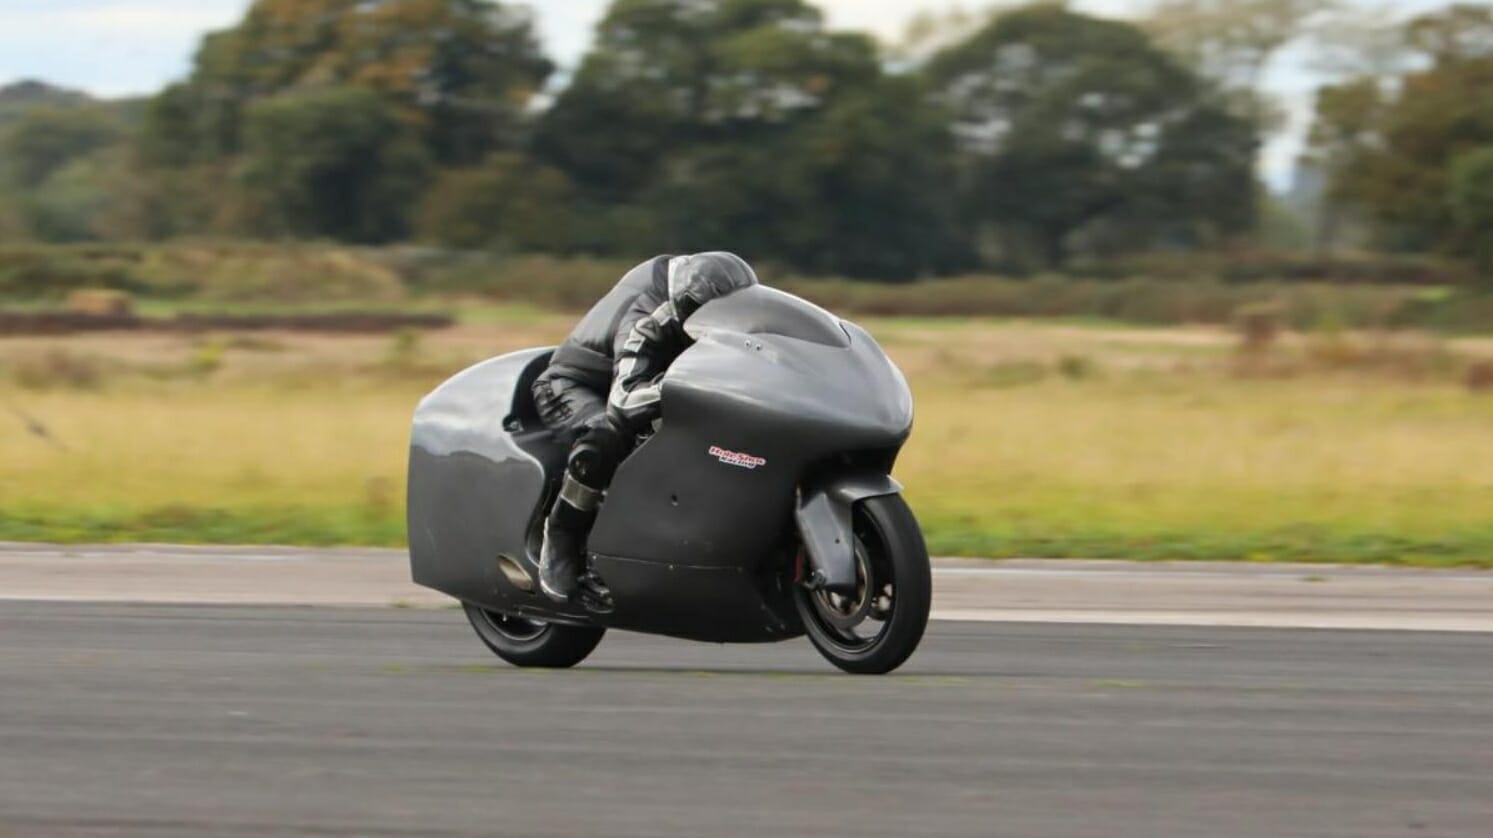 Guy Martin continues to work on 300mph record
- also in the MOTORCYCLES.NEWS APP